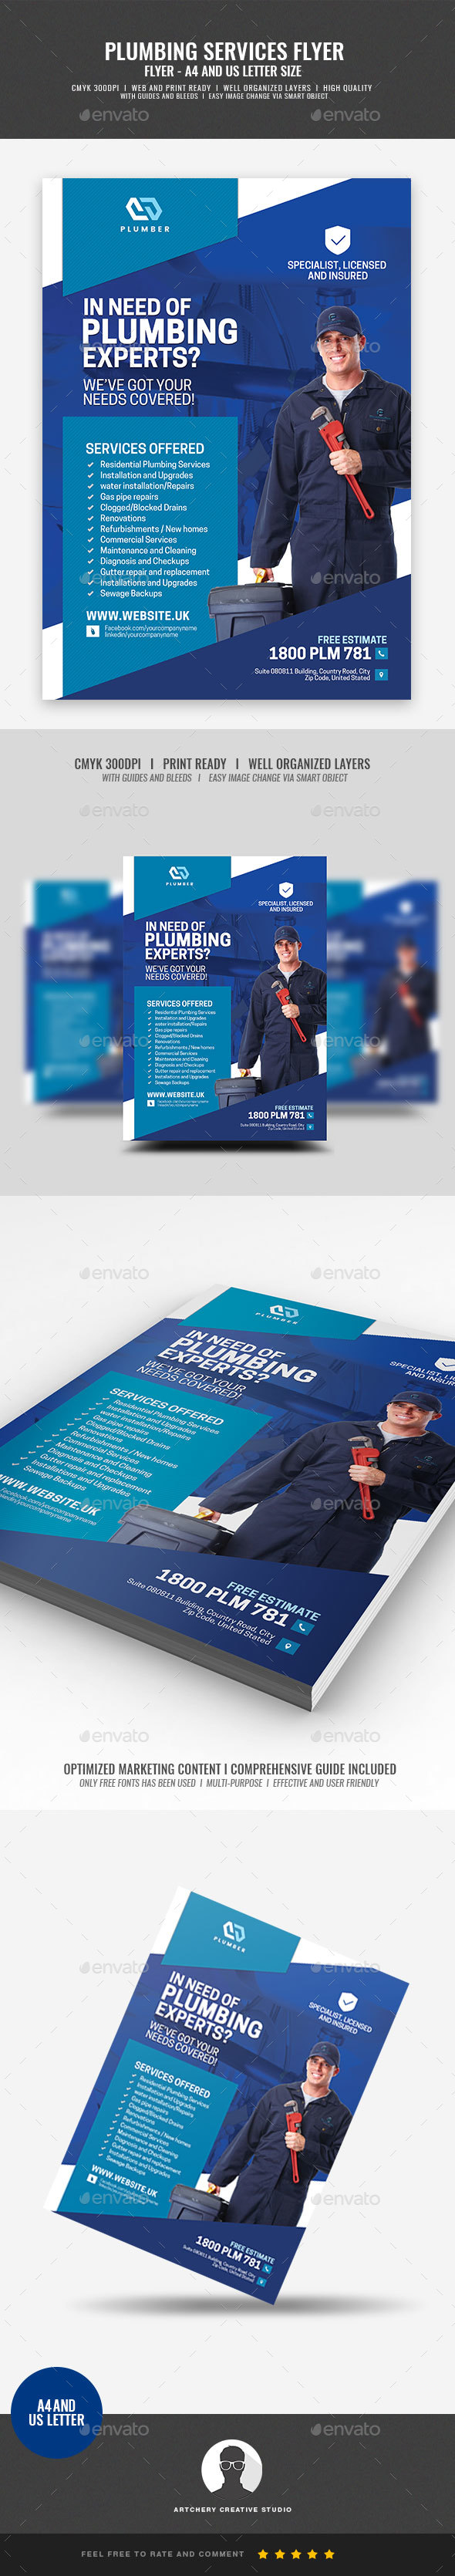 Plumber Services Flyer